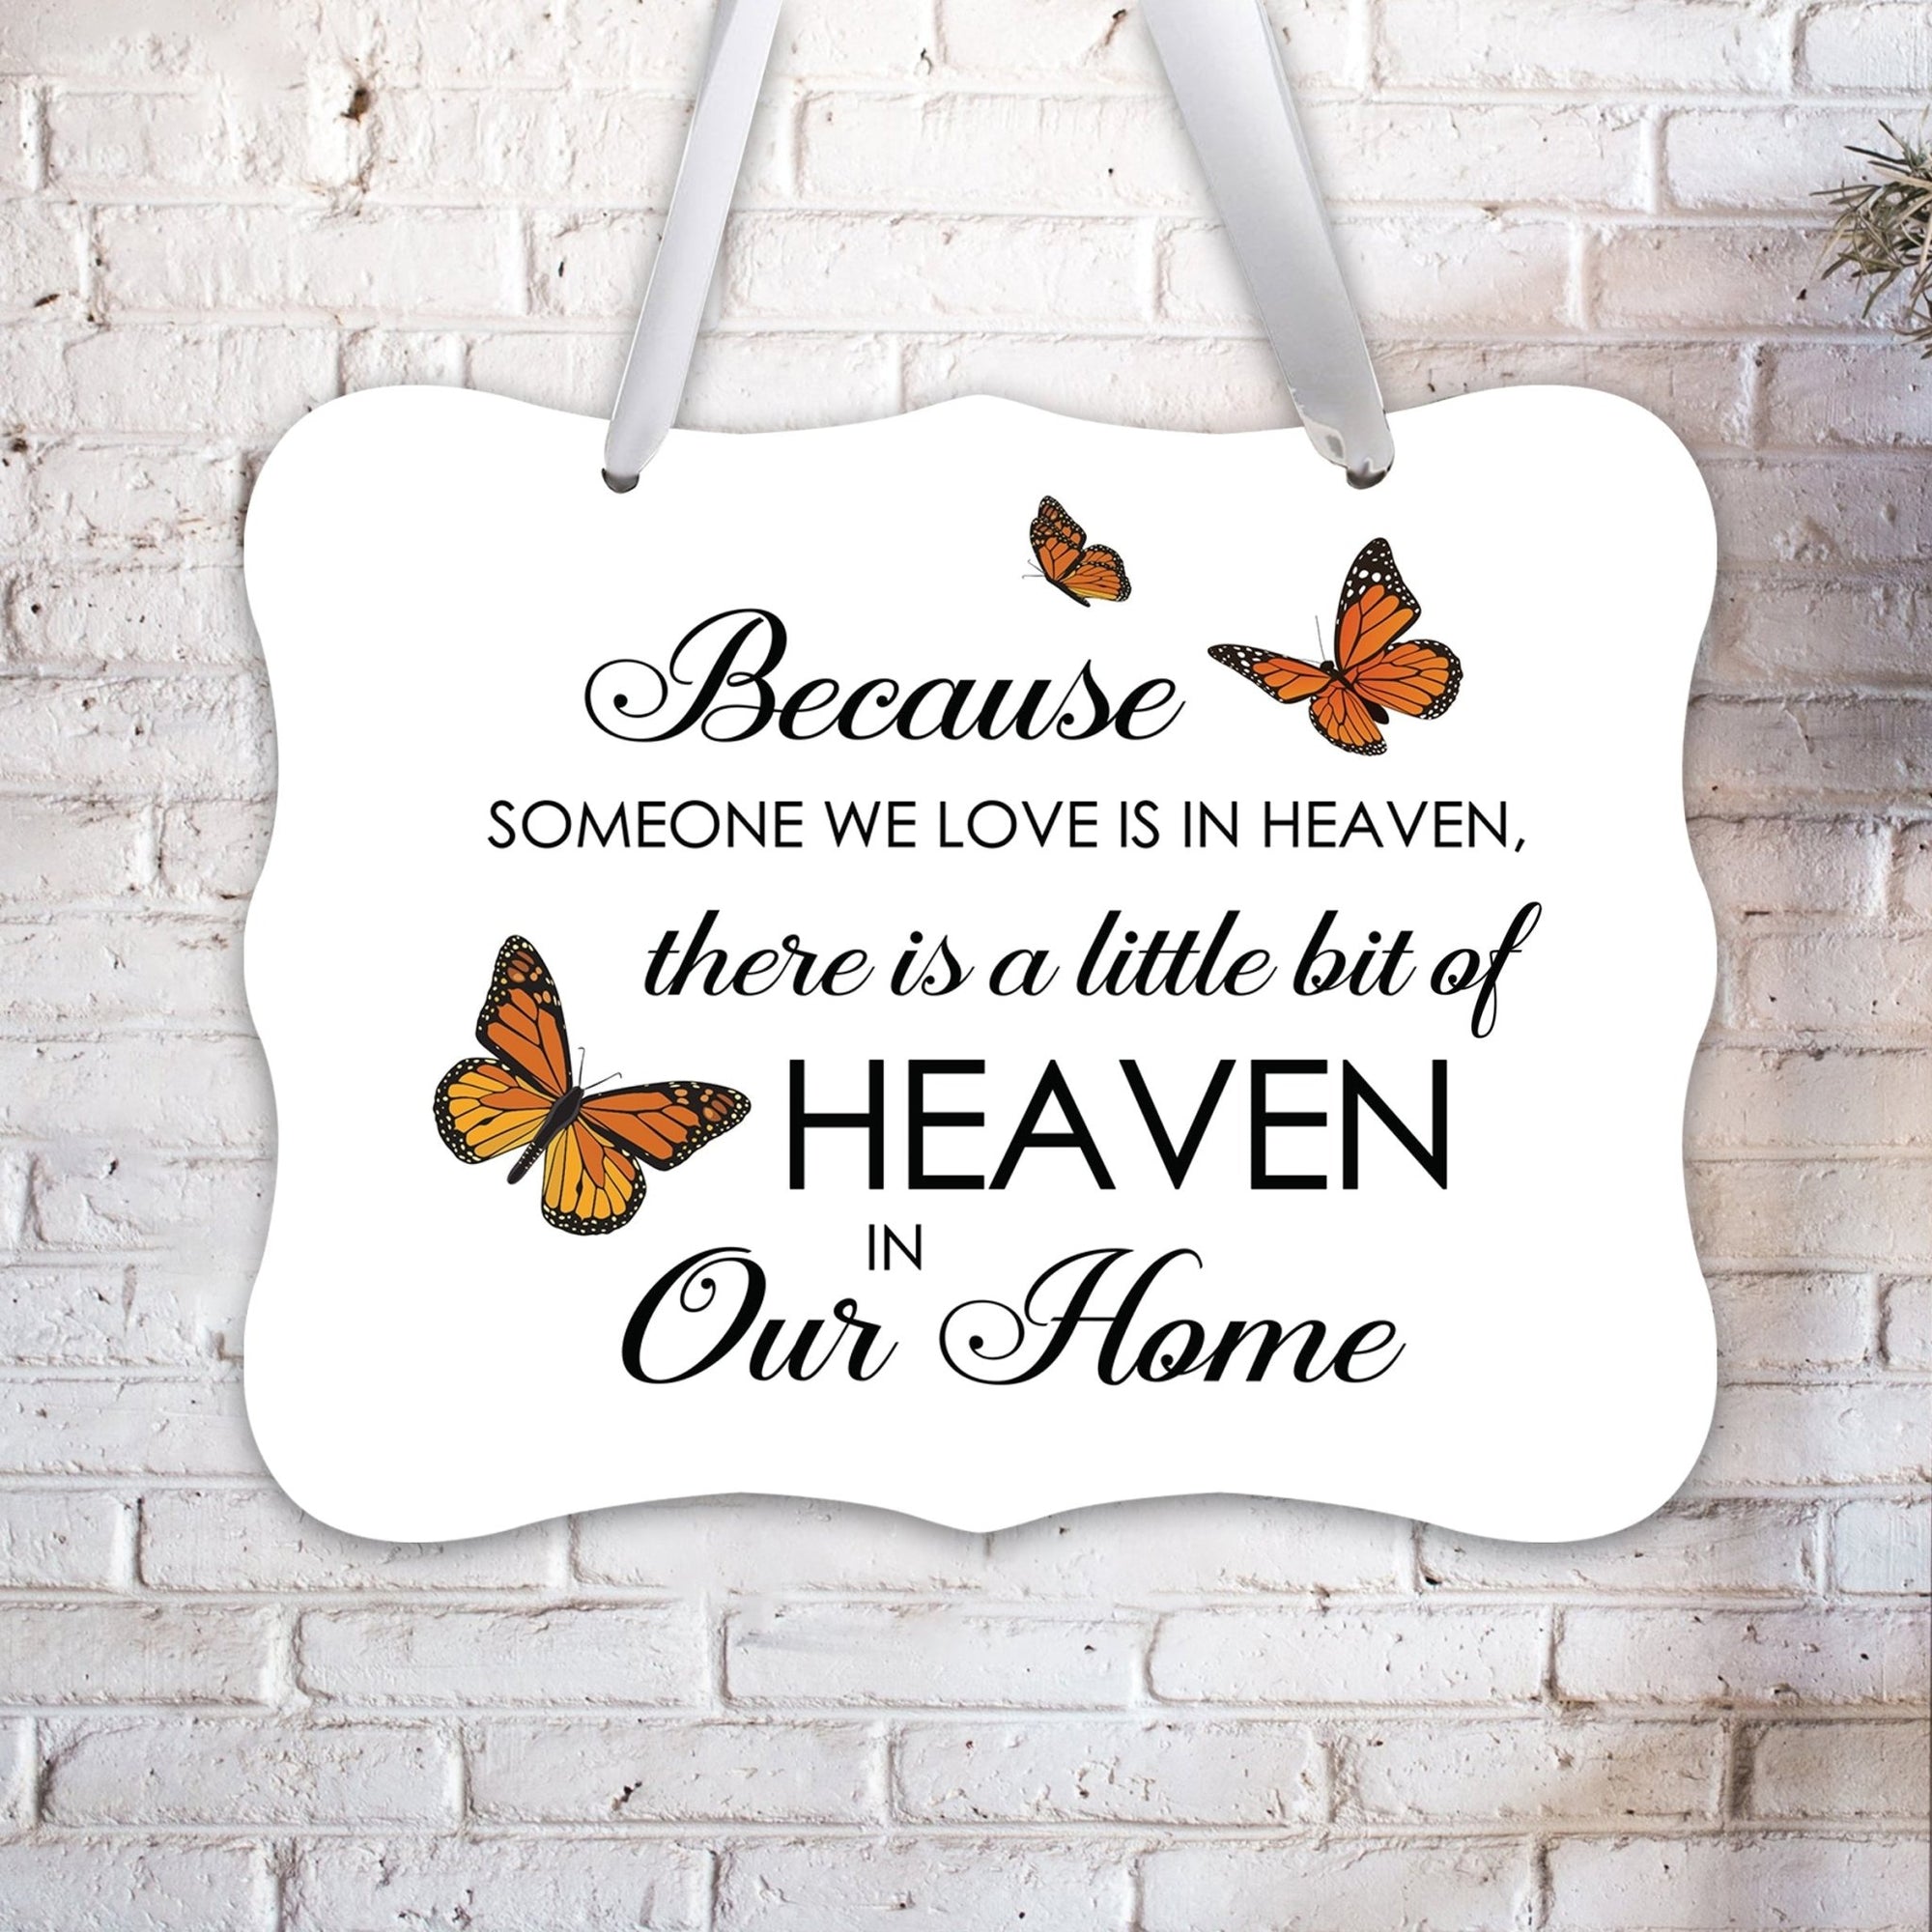 Memorial Hanging Ribbon Wall Decor for Loss of Loved One - Because Someone We Love - LifeSong Milestones